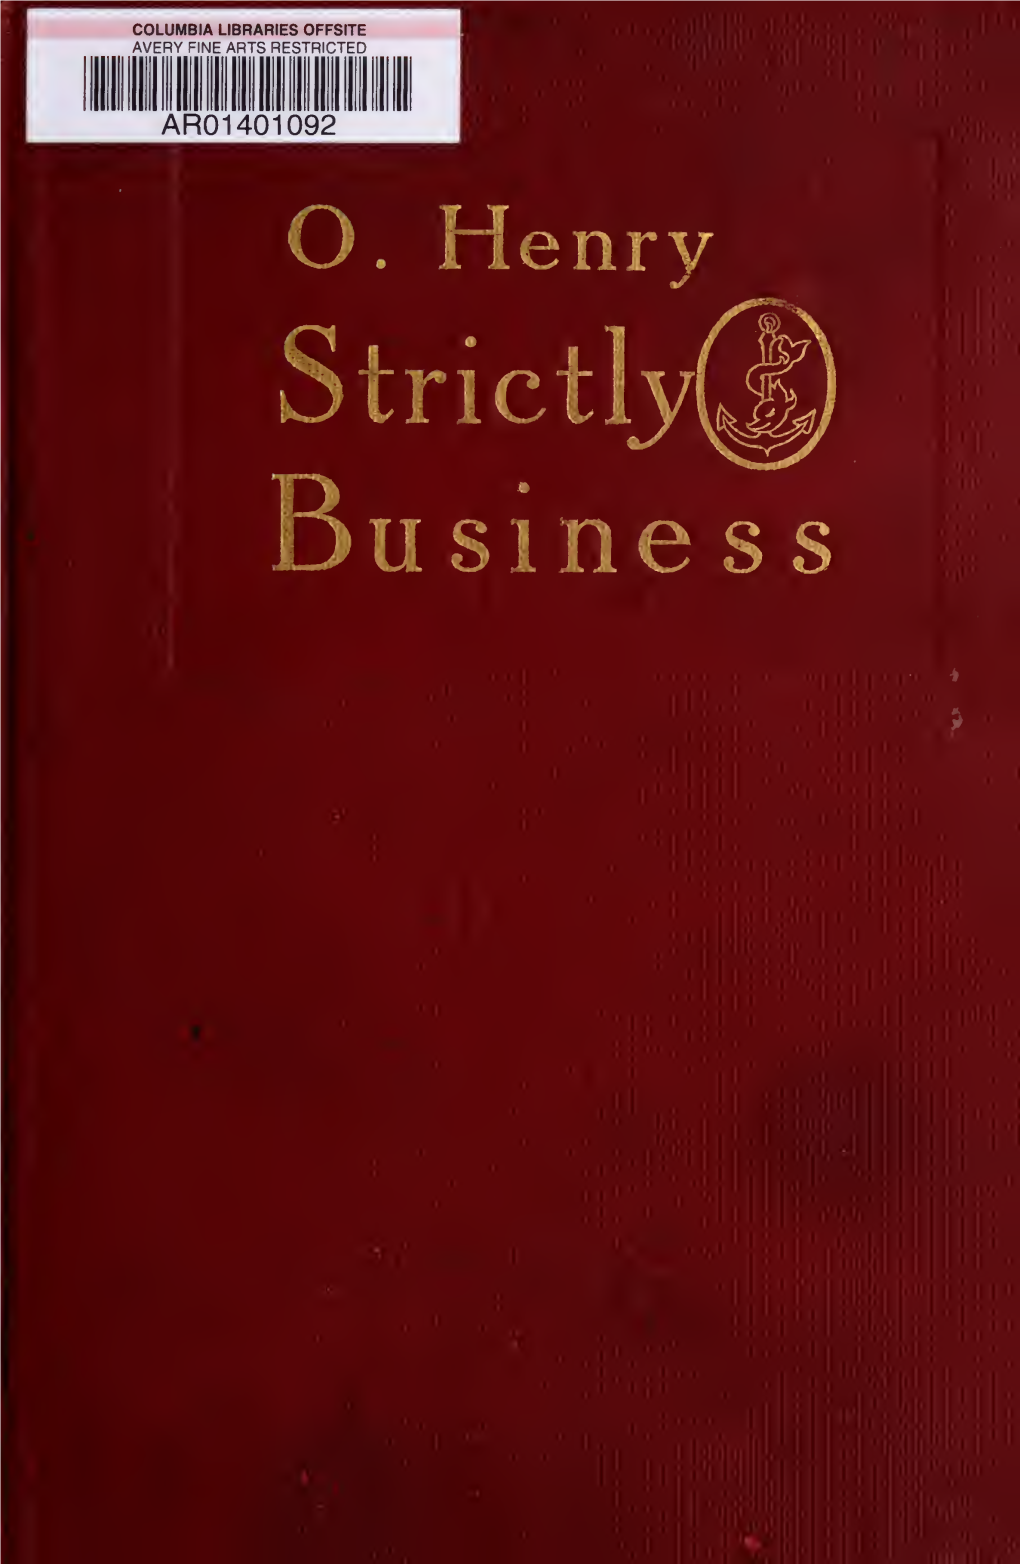 Strictly Business by the Same Author $